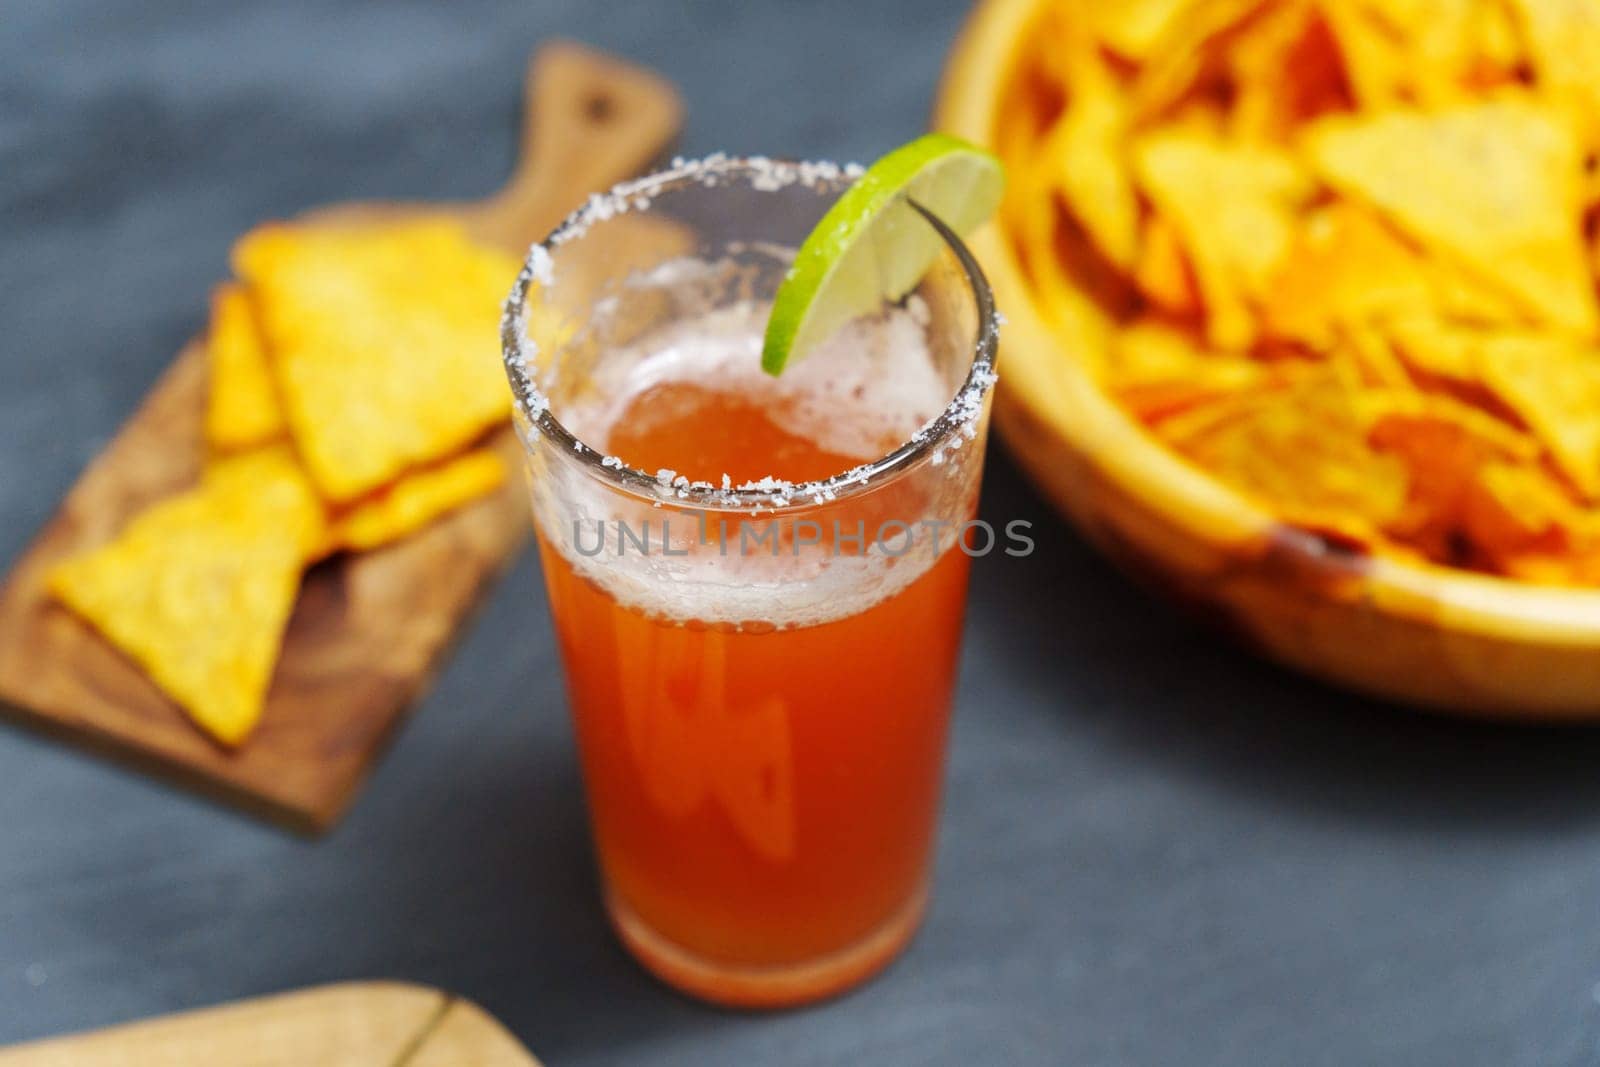 Michelada cocktail with tomato juice, beer and lime in a glass and nachos. Selective focus